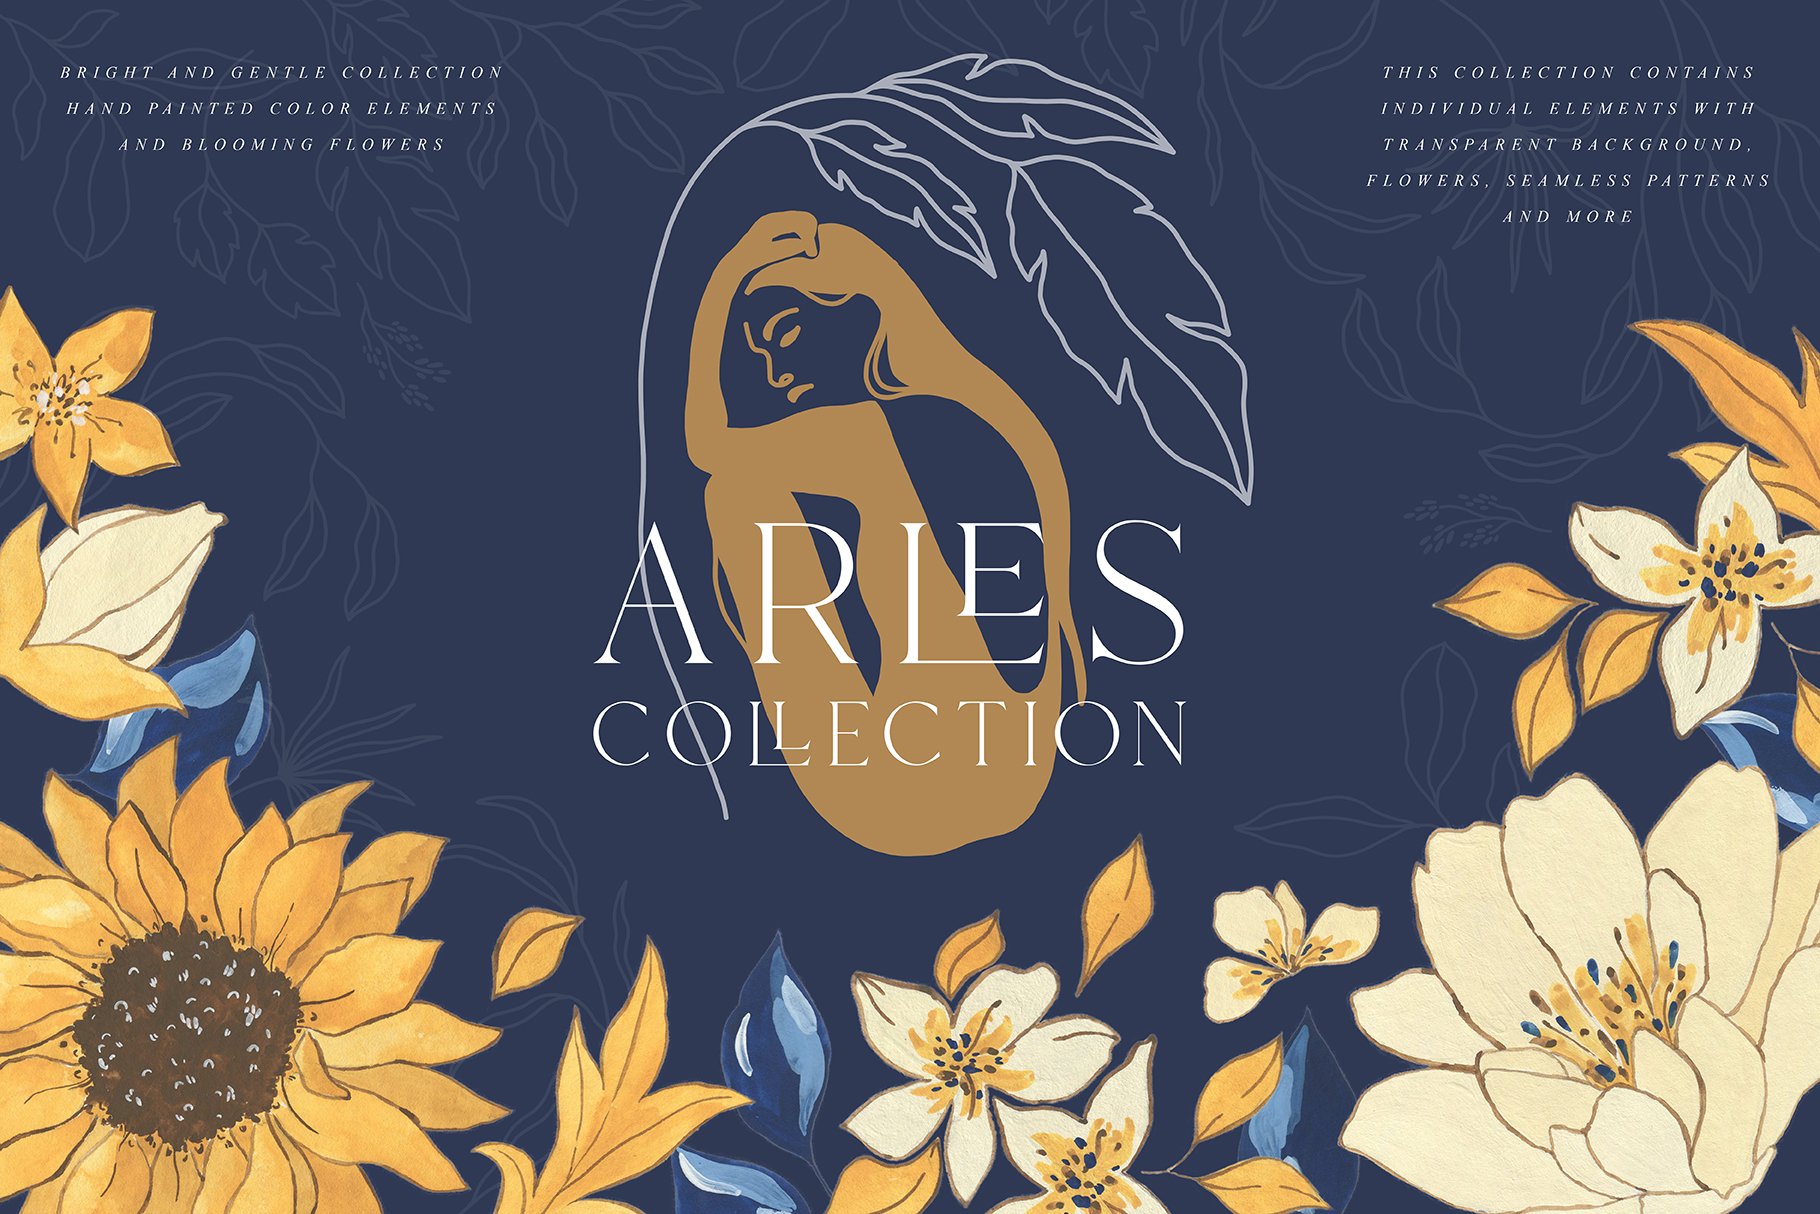 arles_collection-first-image-